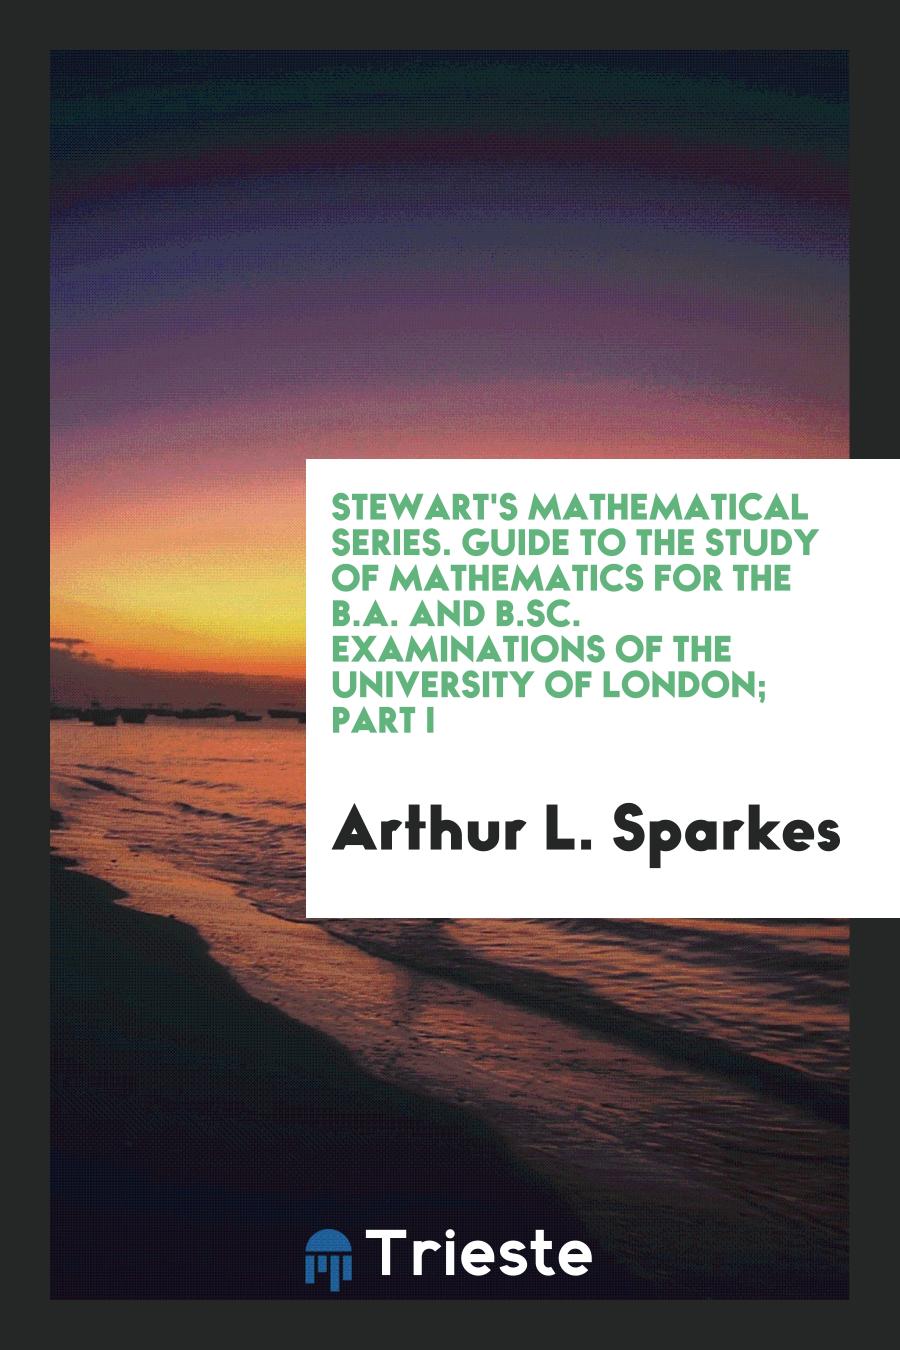 Stewart's Mathematical Series. Guide to the Study of Mathematics for the B.A. And B.Sc. Examinations of the University of London; Part I